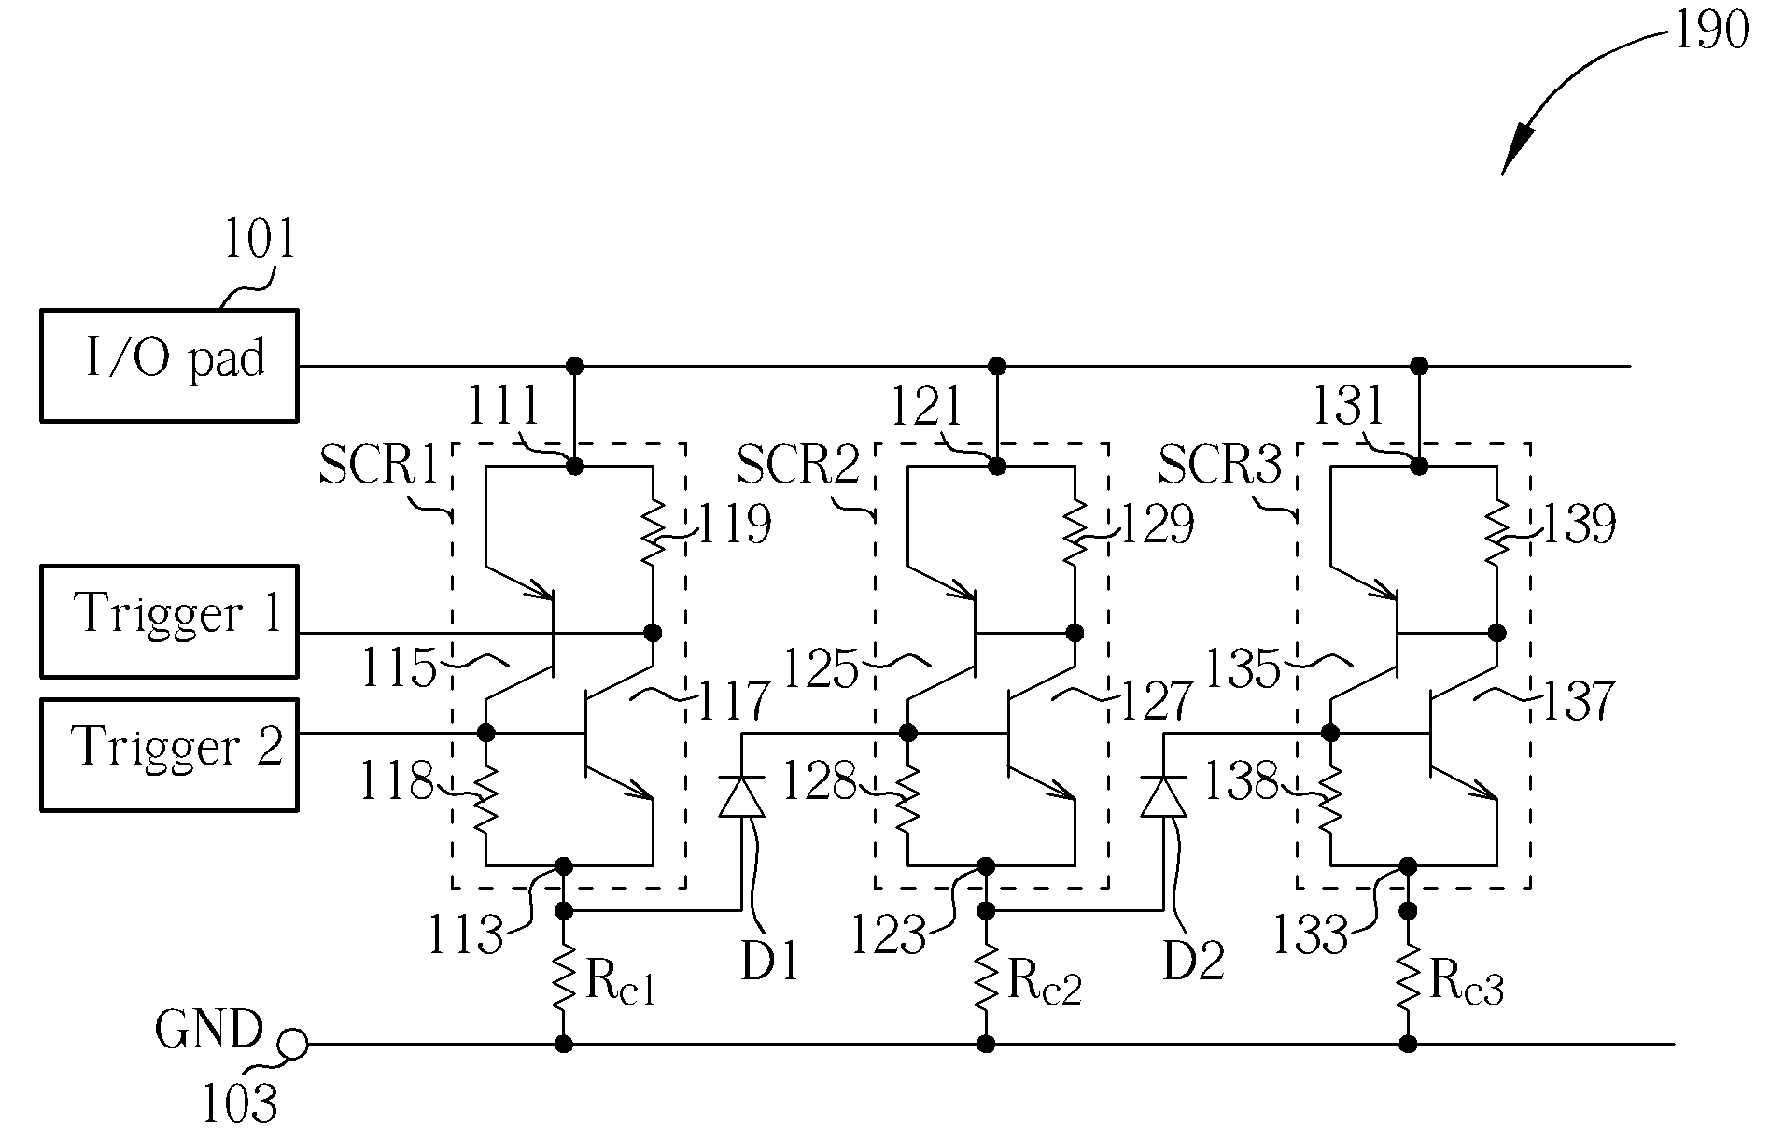 ESD protection circuitry with multi-finger scrs